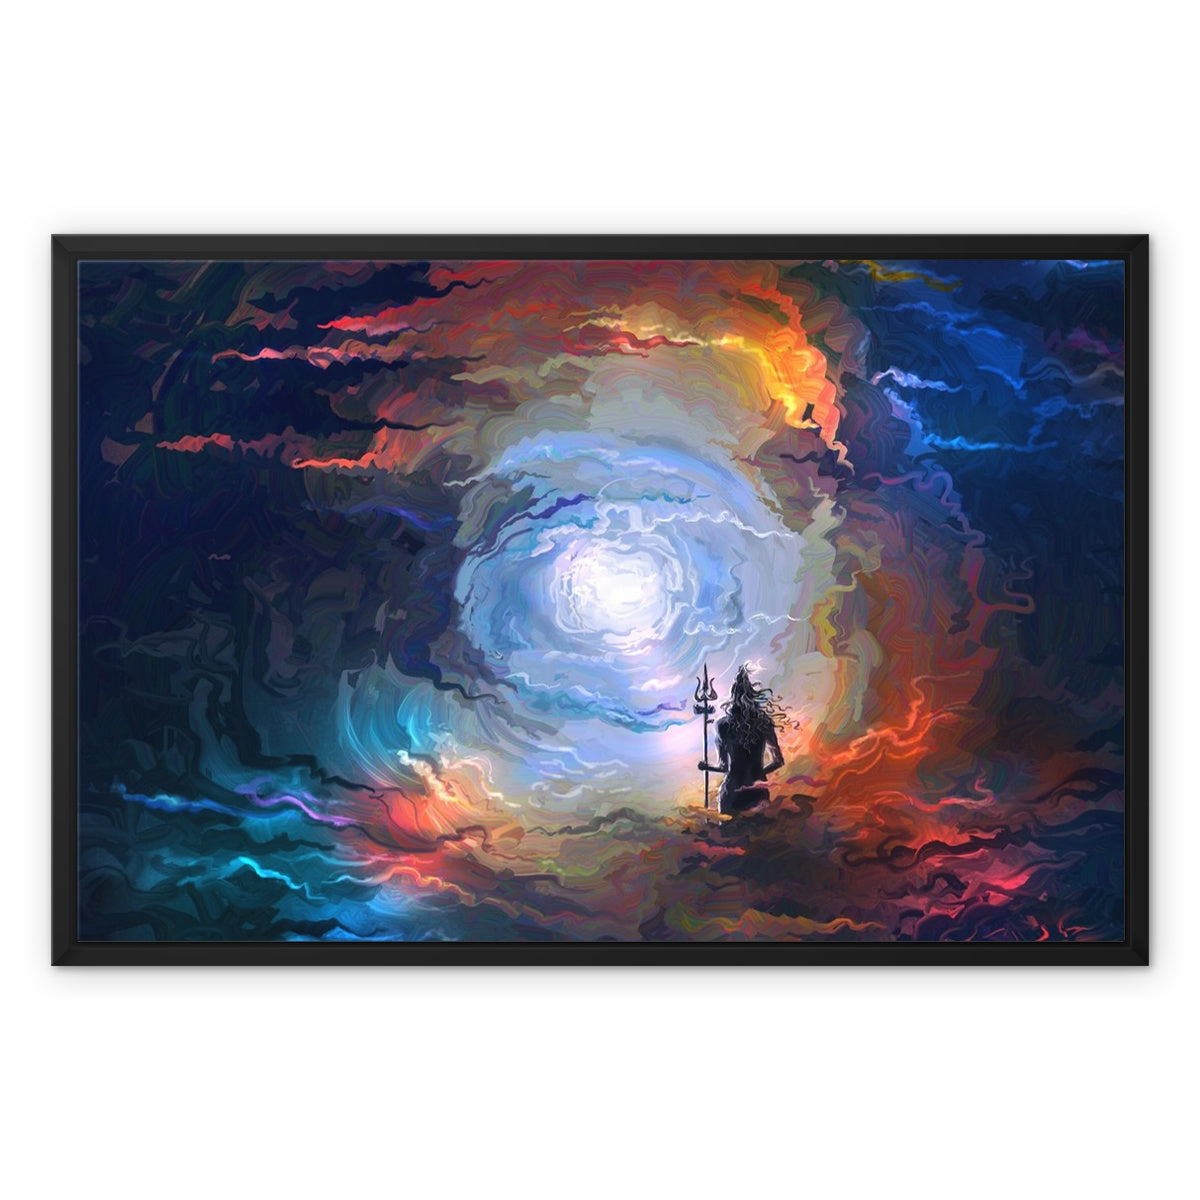 Natraj Lord Shiva - Indian Religious Painting - Canvas Prints by Shiva |  Buy Posters, Frames, Canvas & Digital Art Prints | Small, Compact, Medium  and Large Variants